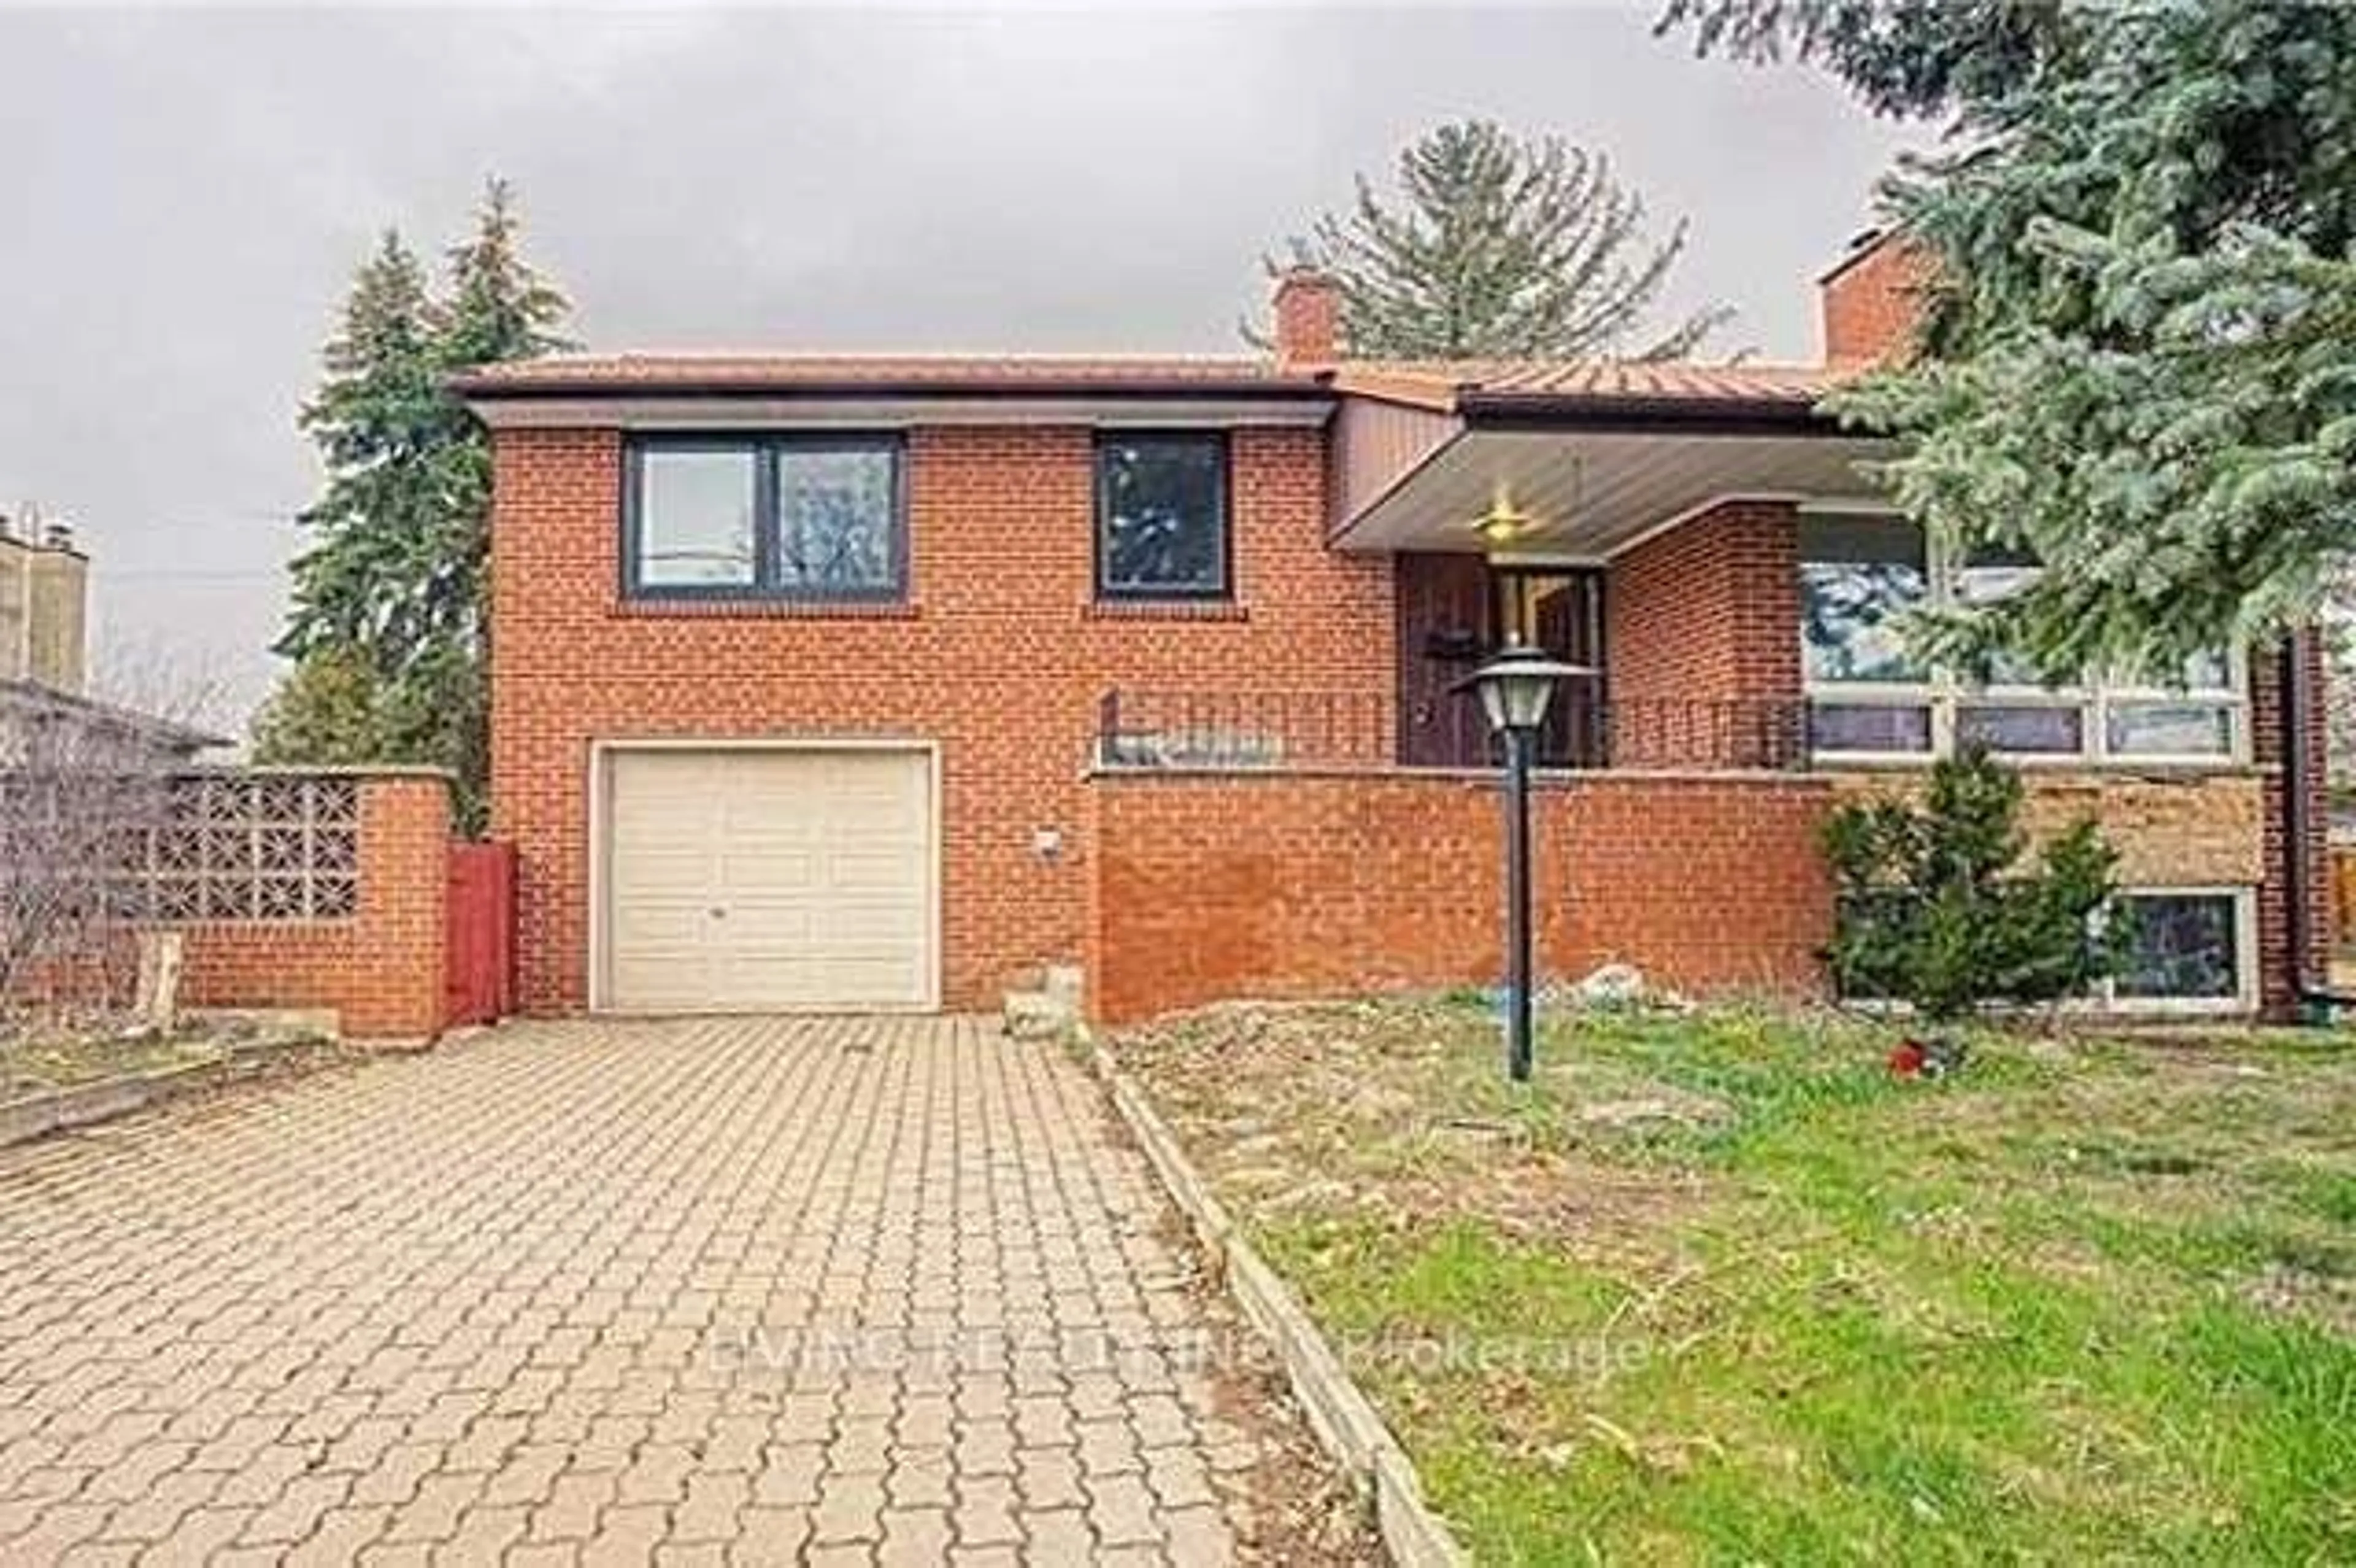 Home with brick exterior material for 24 Walmer Rd, Richmond Hill Ontario L4C 3W7